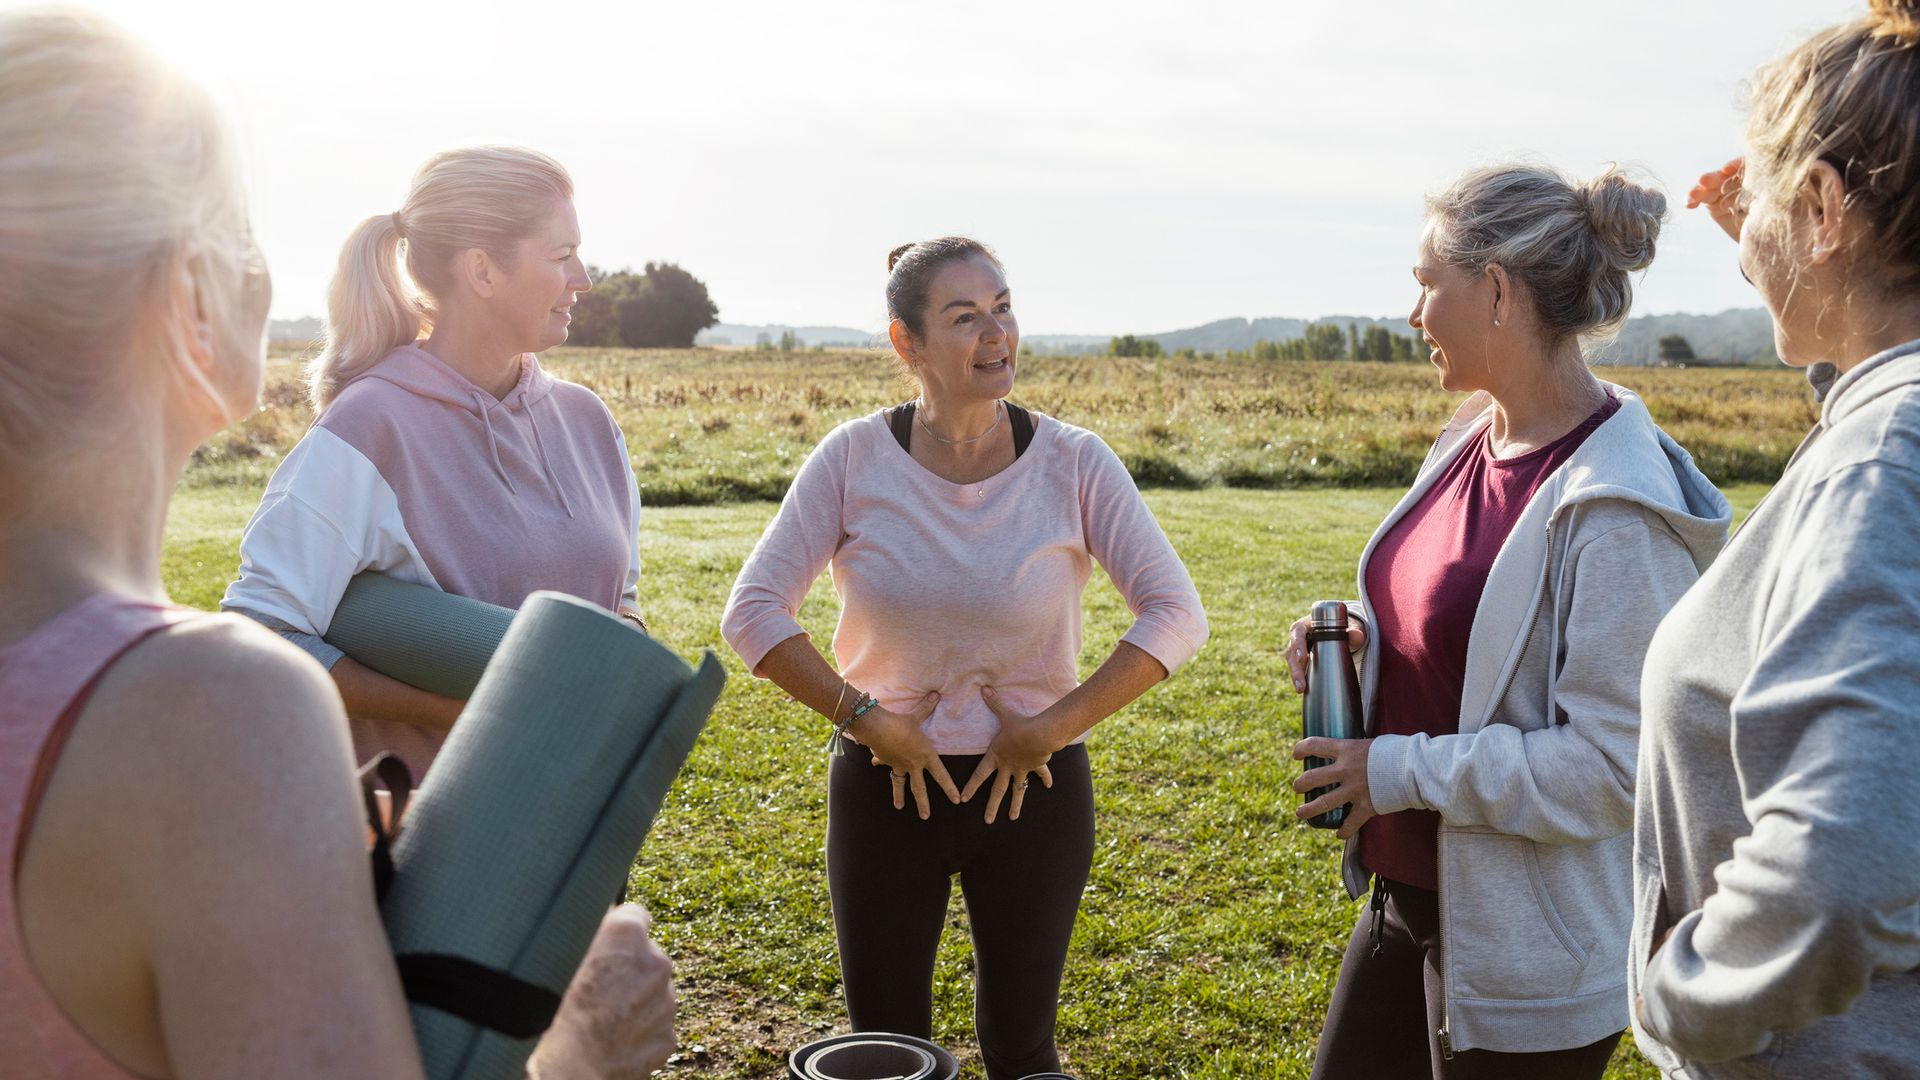 Group of mature women doing Yoga outdoors in France together while on a wellness vacation. They are all standing holding their mats ready to get started. The yoga instructor is giving advice on the exercises they will be doing.